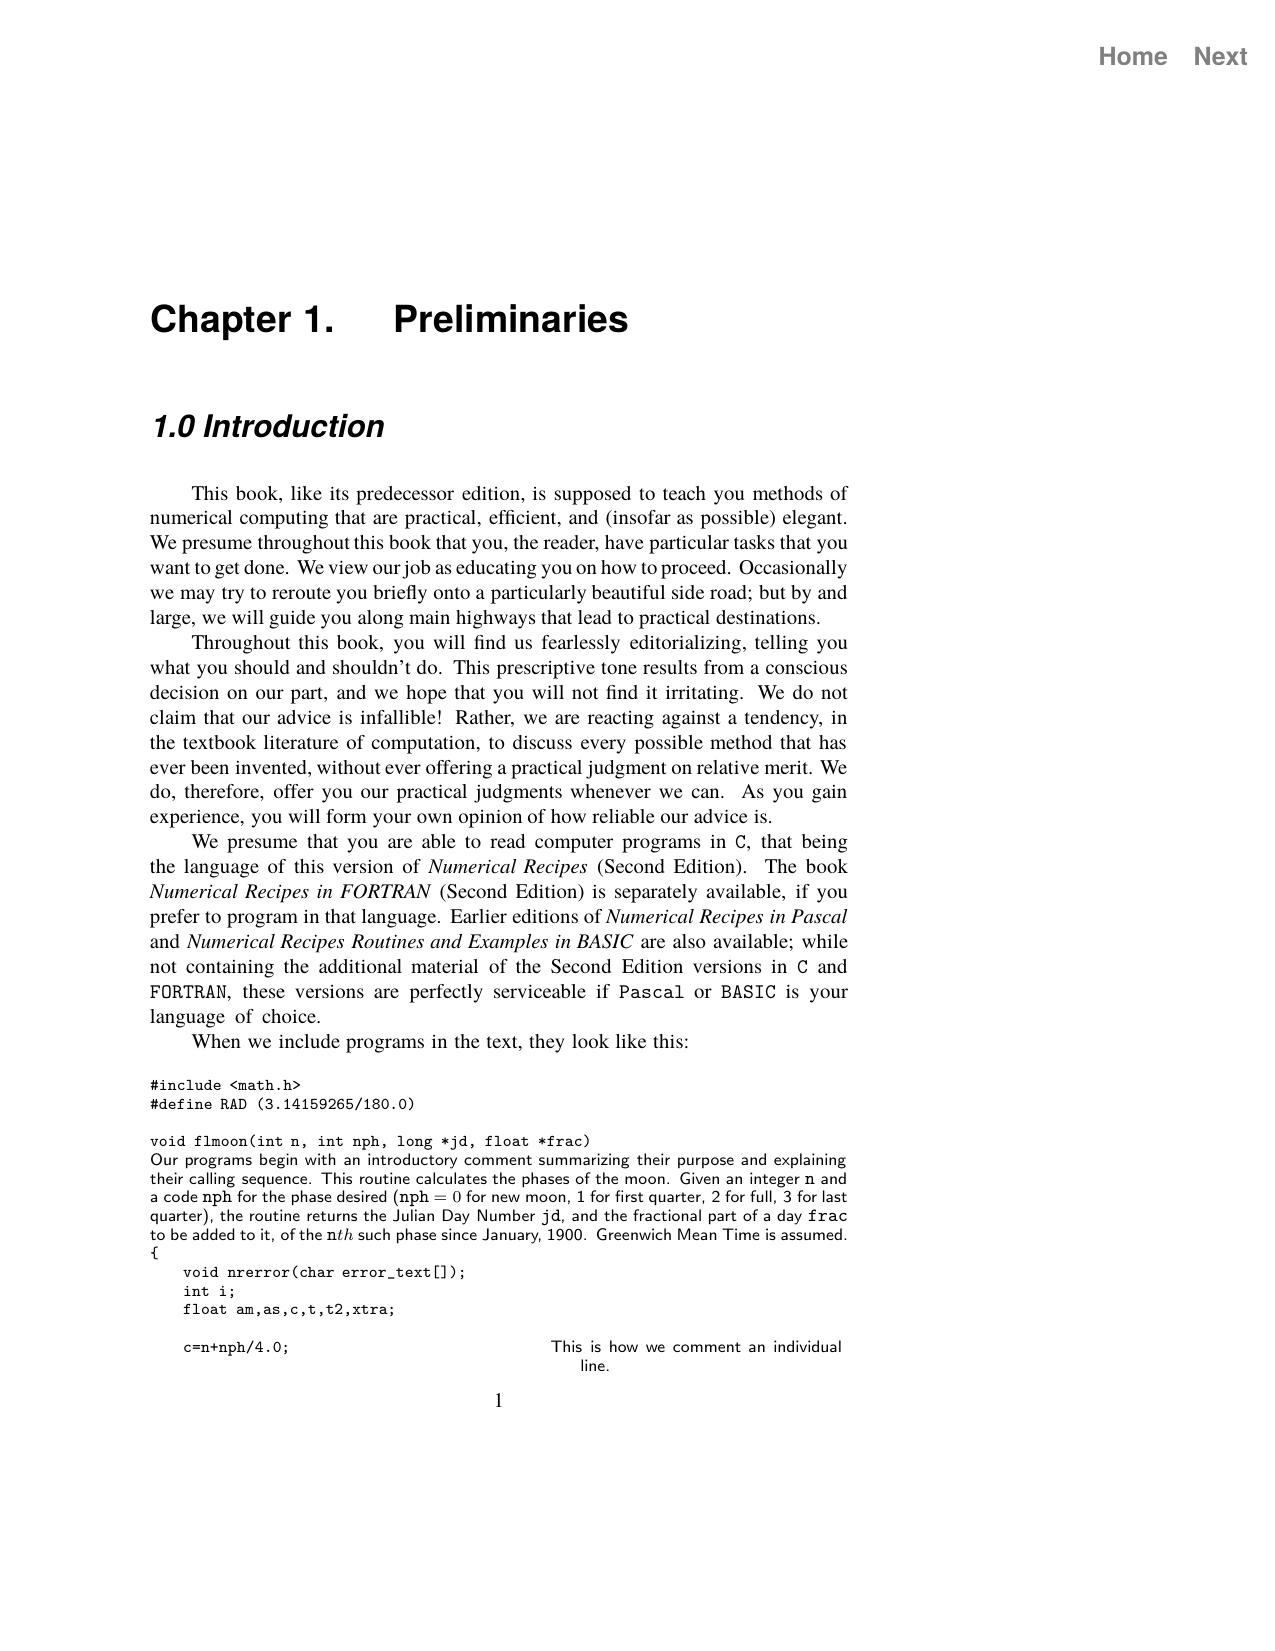 Numerical Recipes in C - Chapter 1. Preliminaries by Unknown